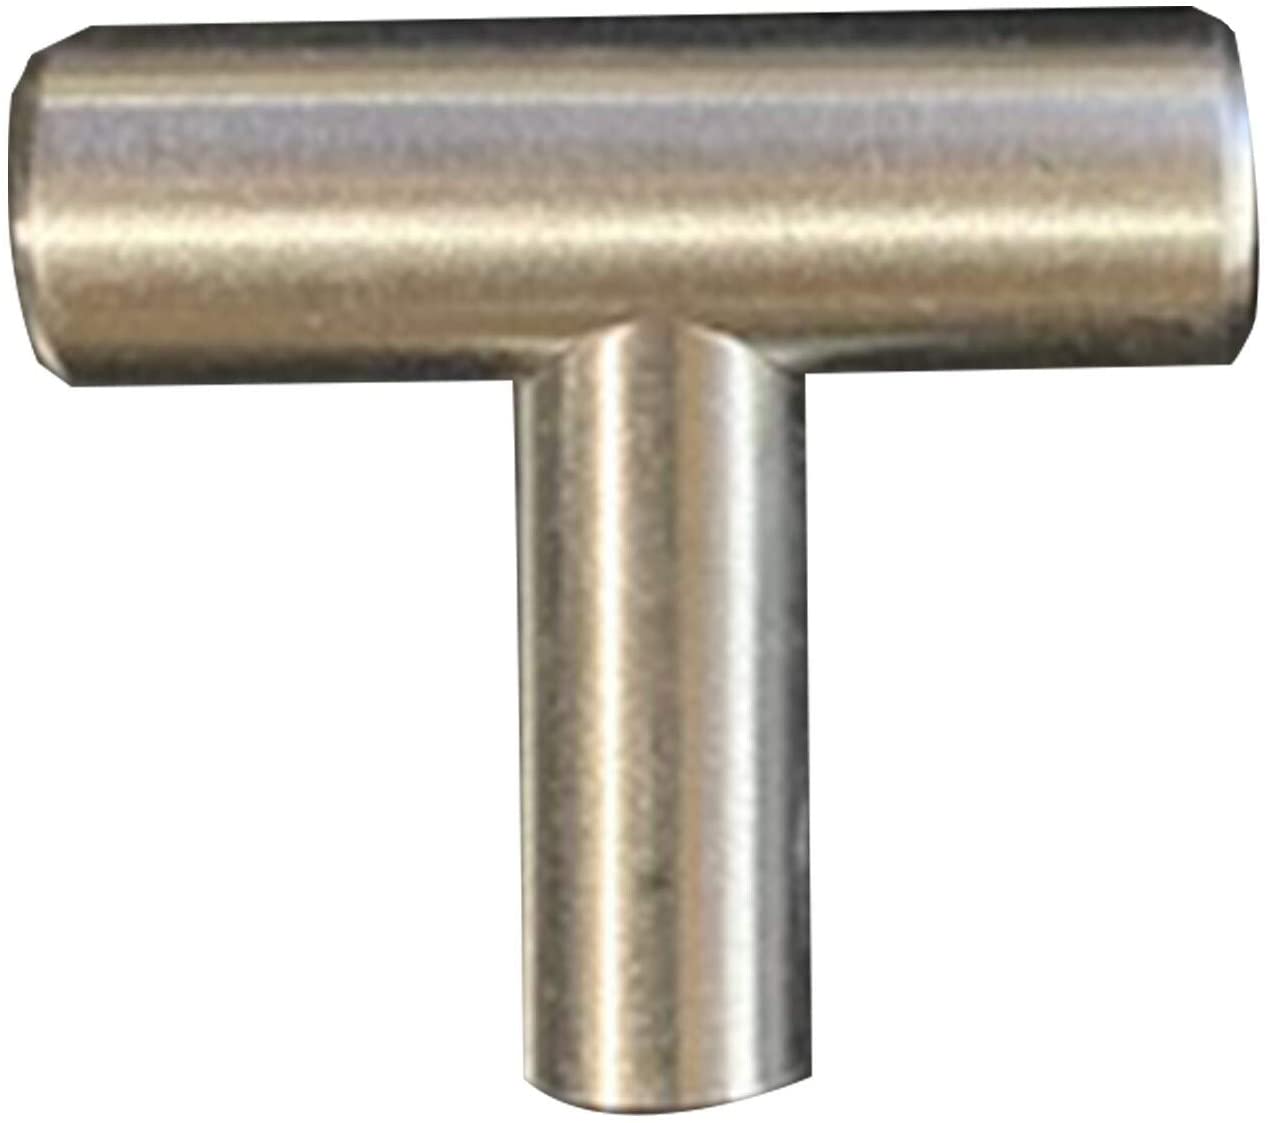 Shaped Bar Pull Brushed Nickel Finish 1 5l X 1 5w 0 5h Modern Contemporary Stainless Steel